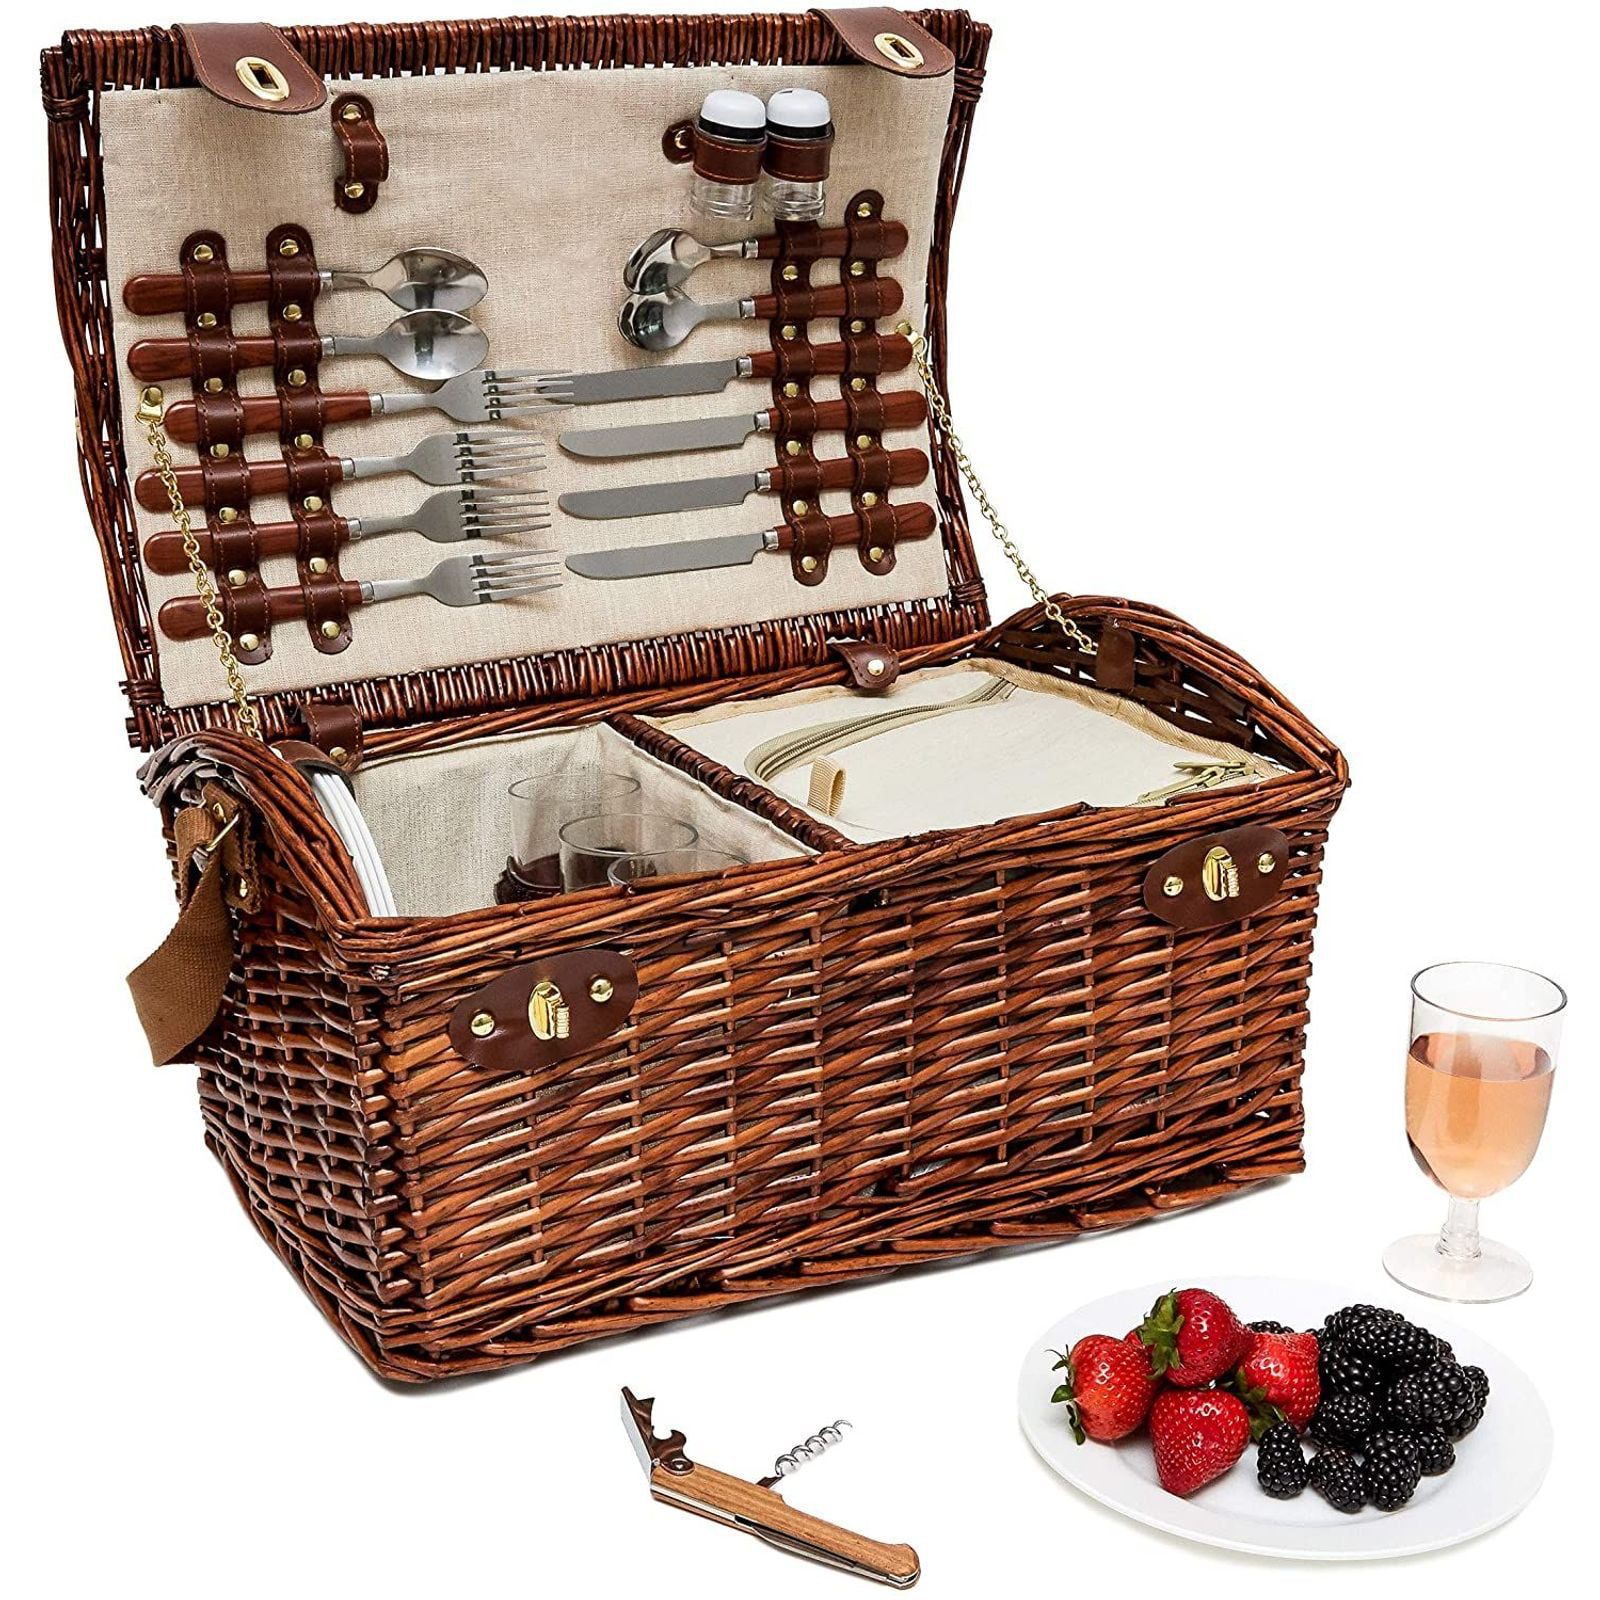 Picnic Basket Set for Men and Woman,Wicker Picnic Basket for 4 Person 